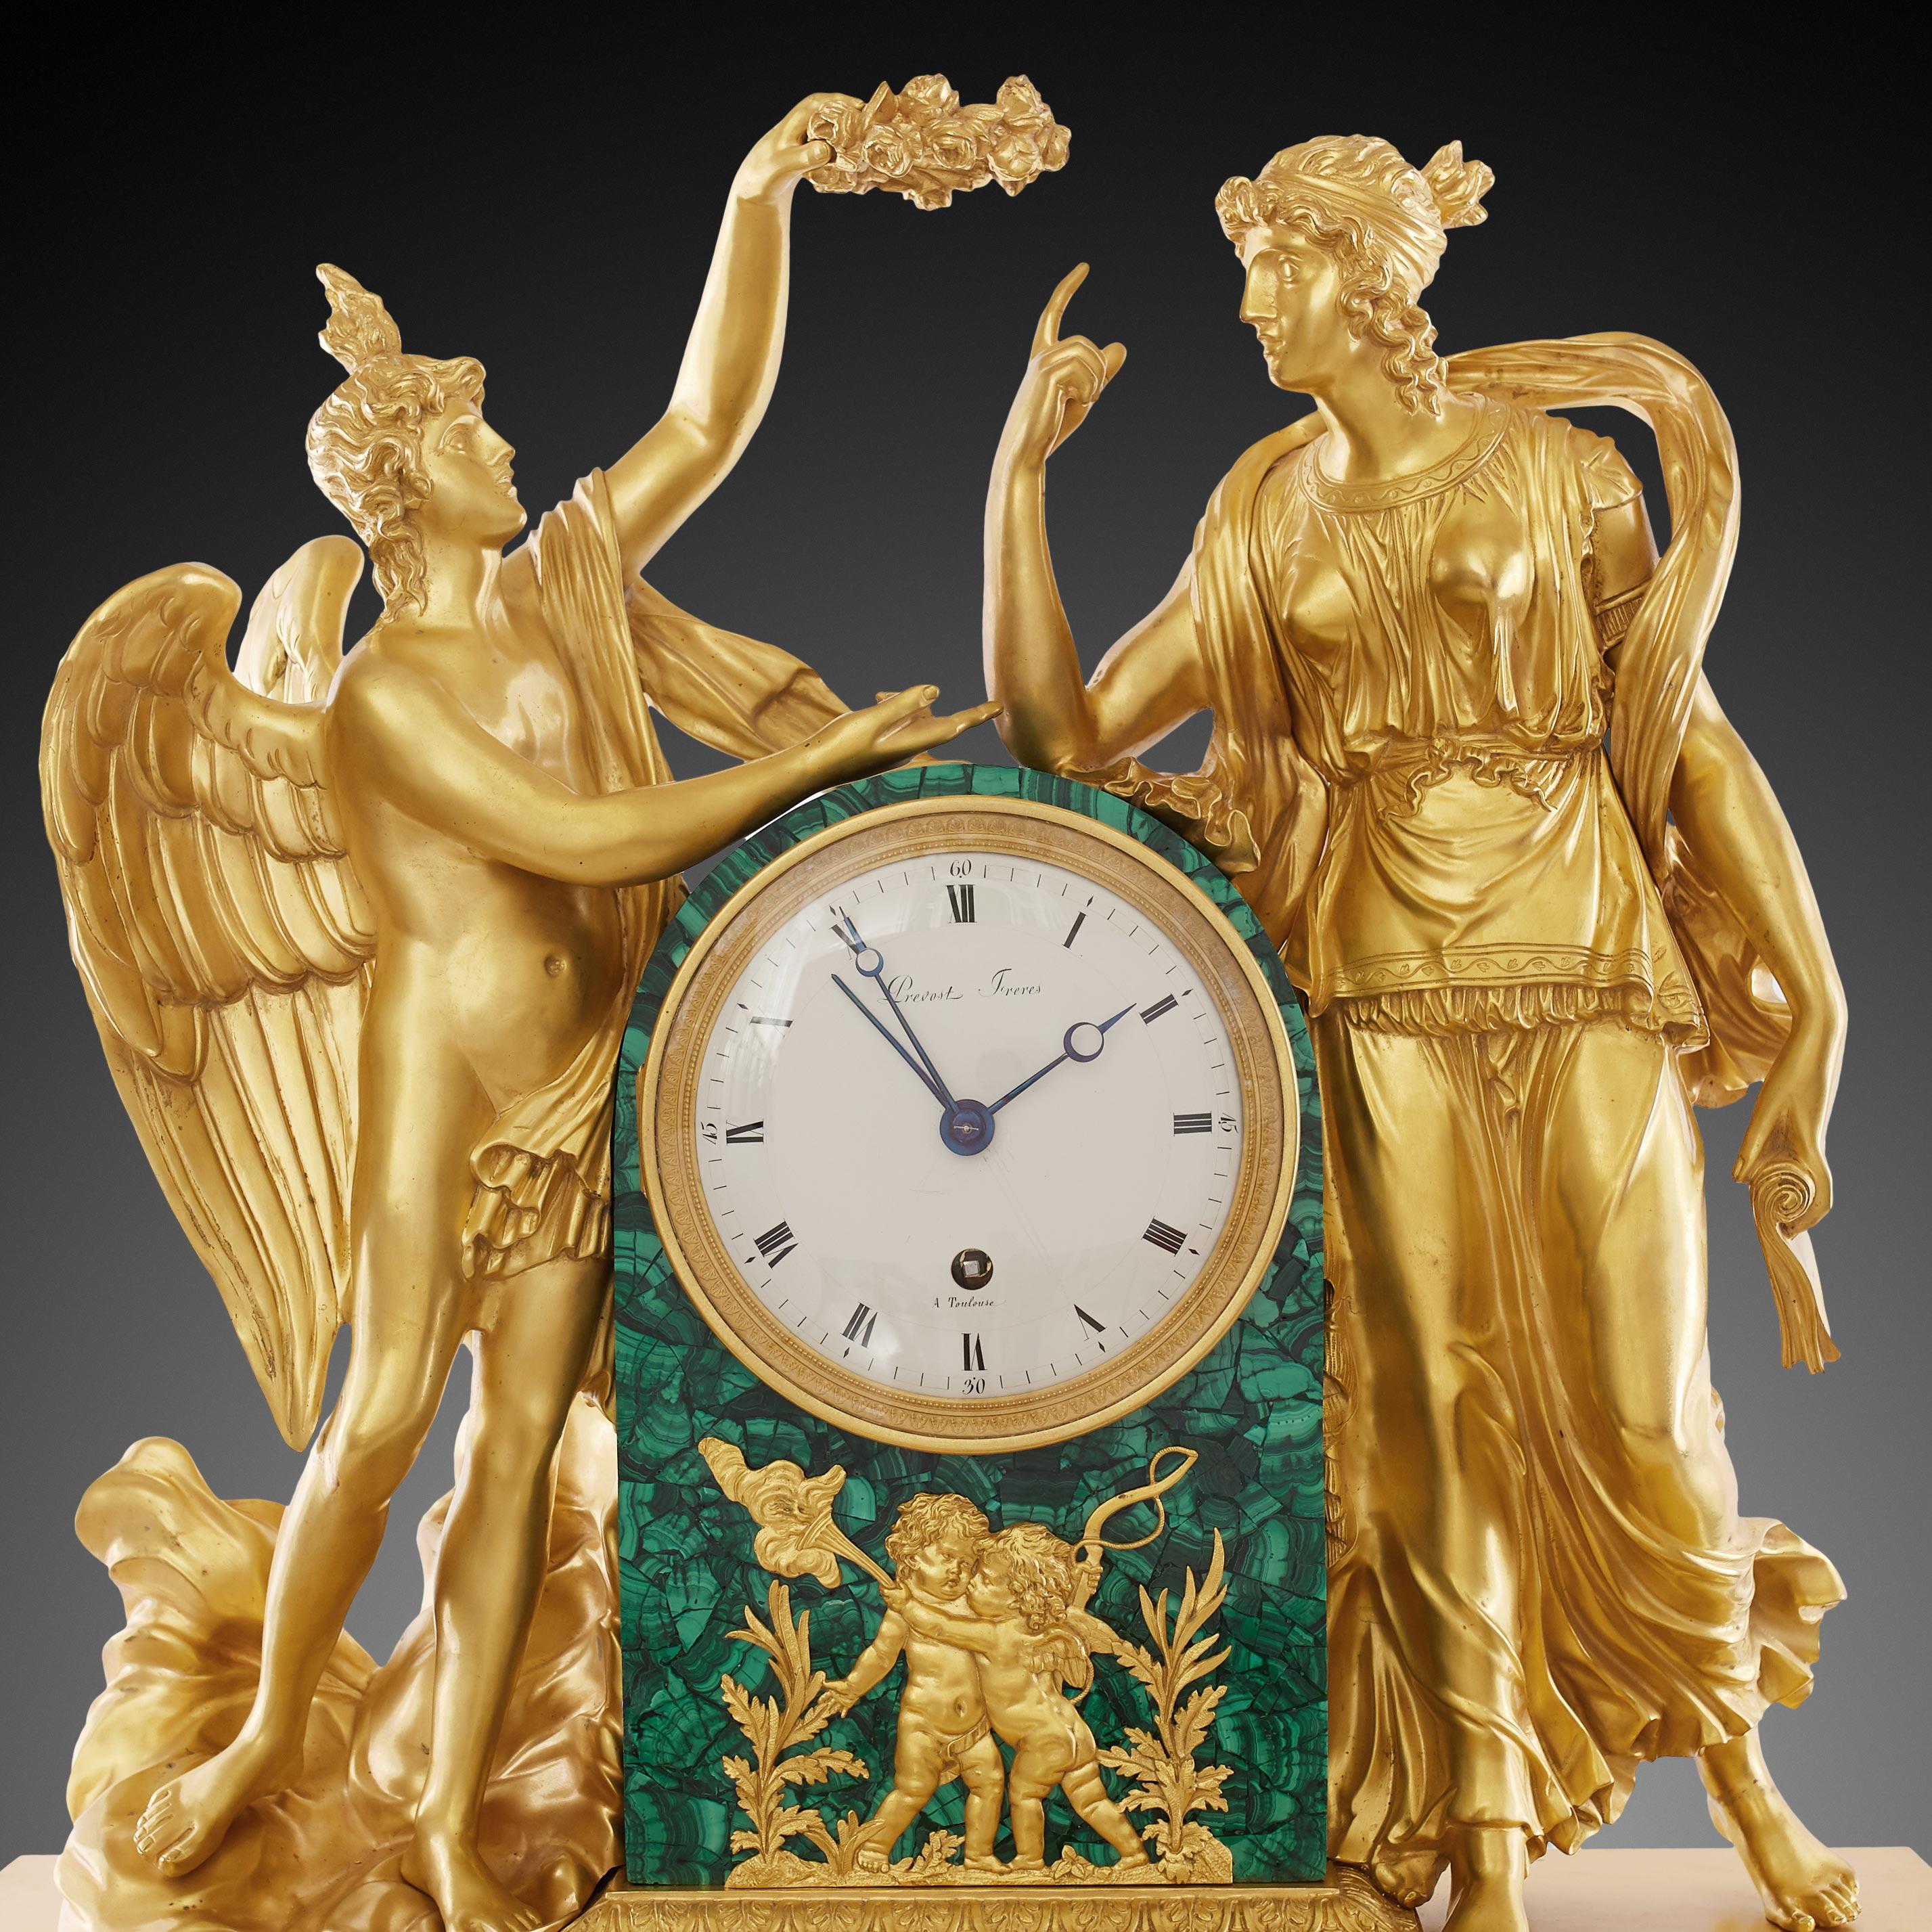 Fired Mantel Clock 19th Century Louis Philippe Charles X by Prevost Freres a Toulose